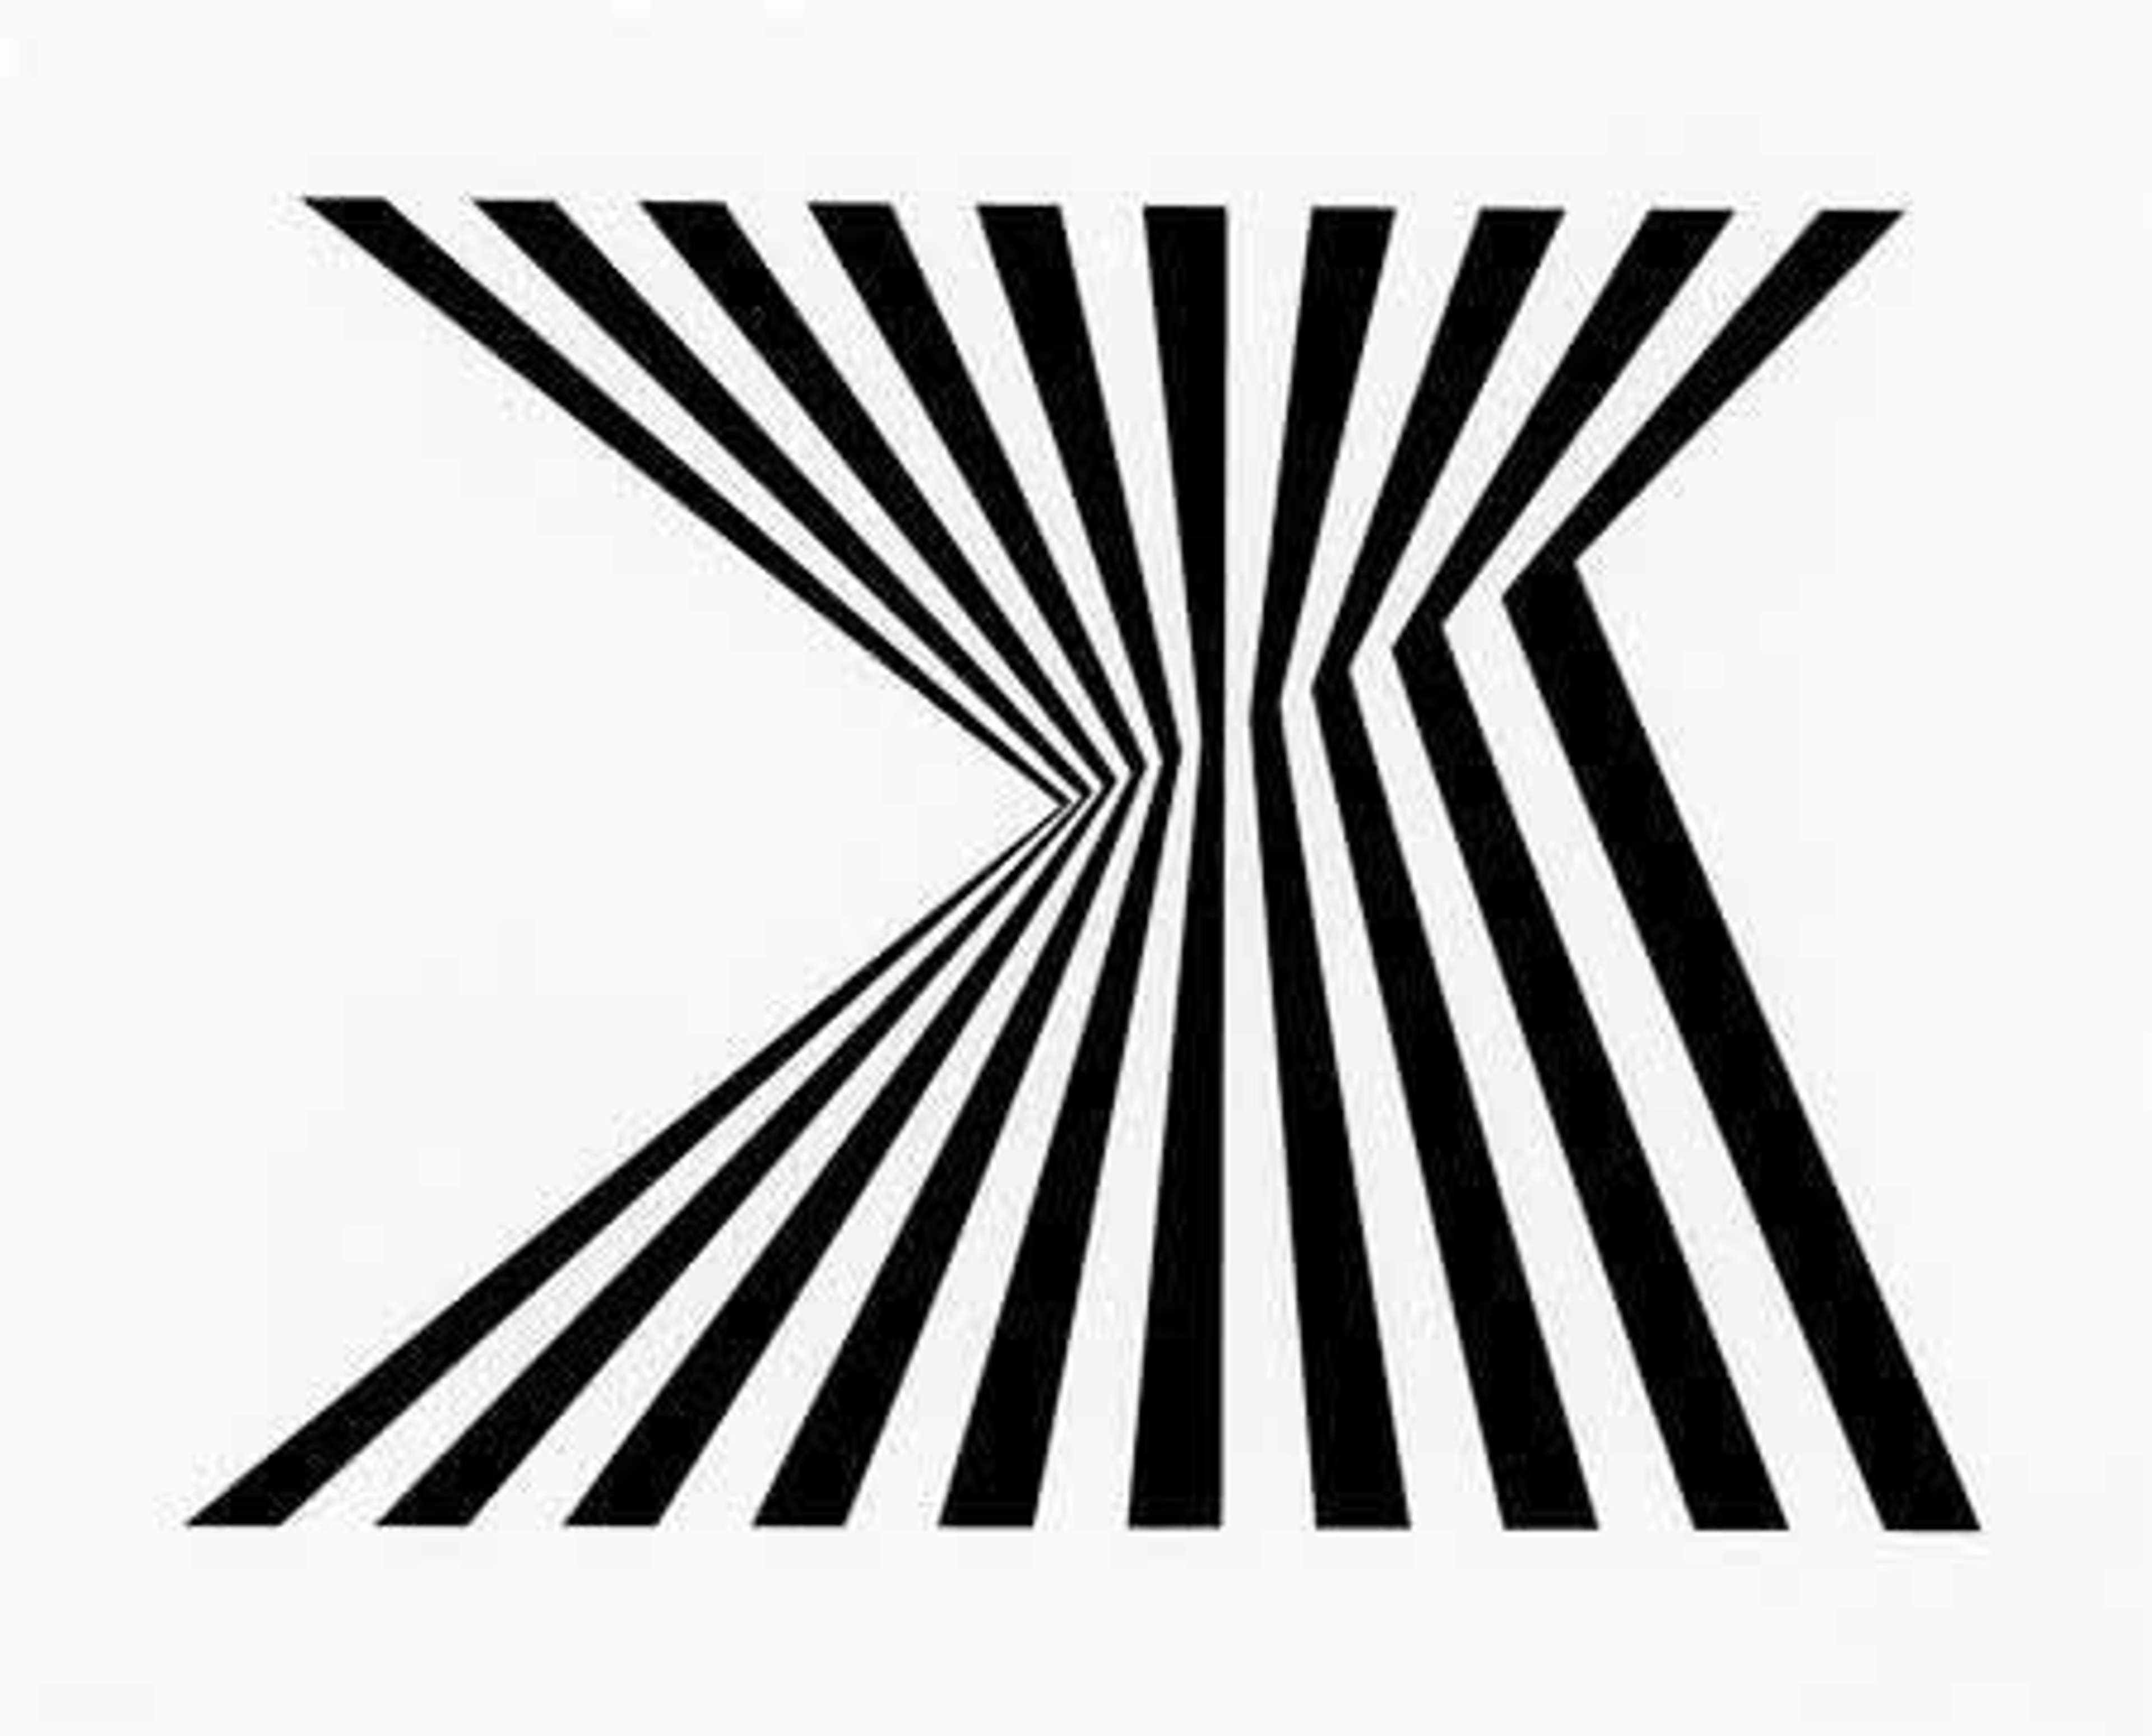 Black and white print composed of horizontal lines bent at altering angles across the picture surface